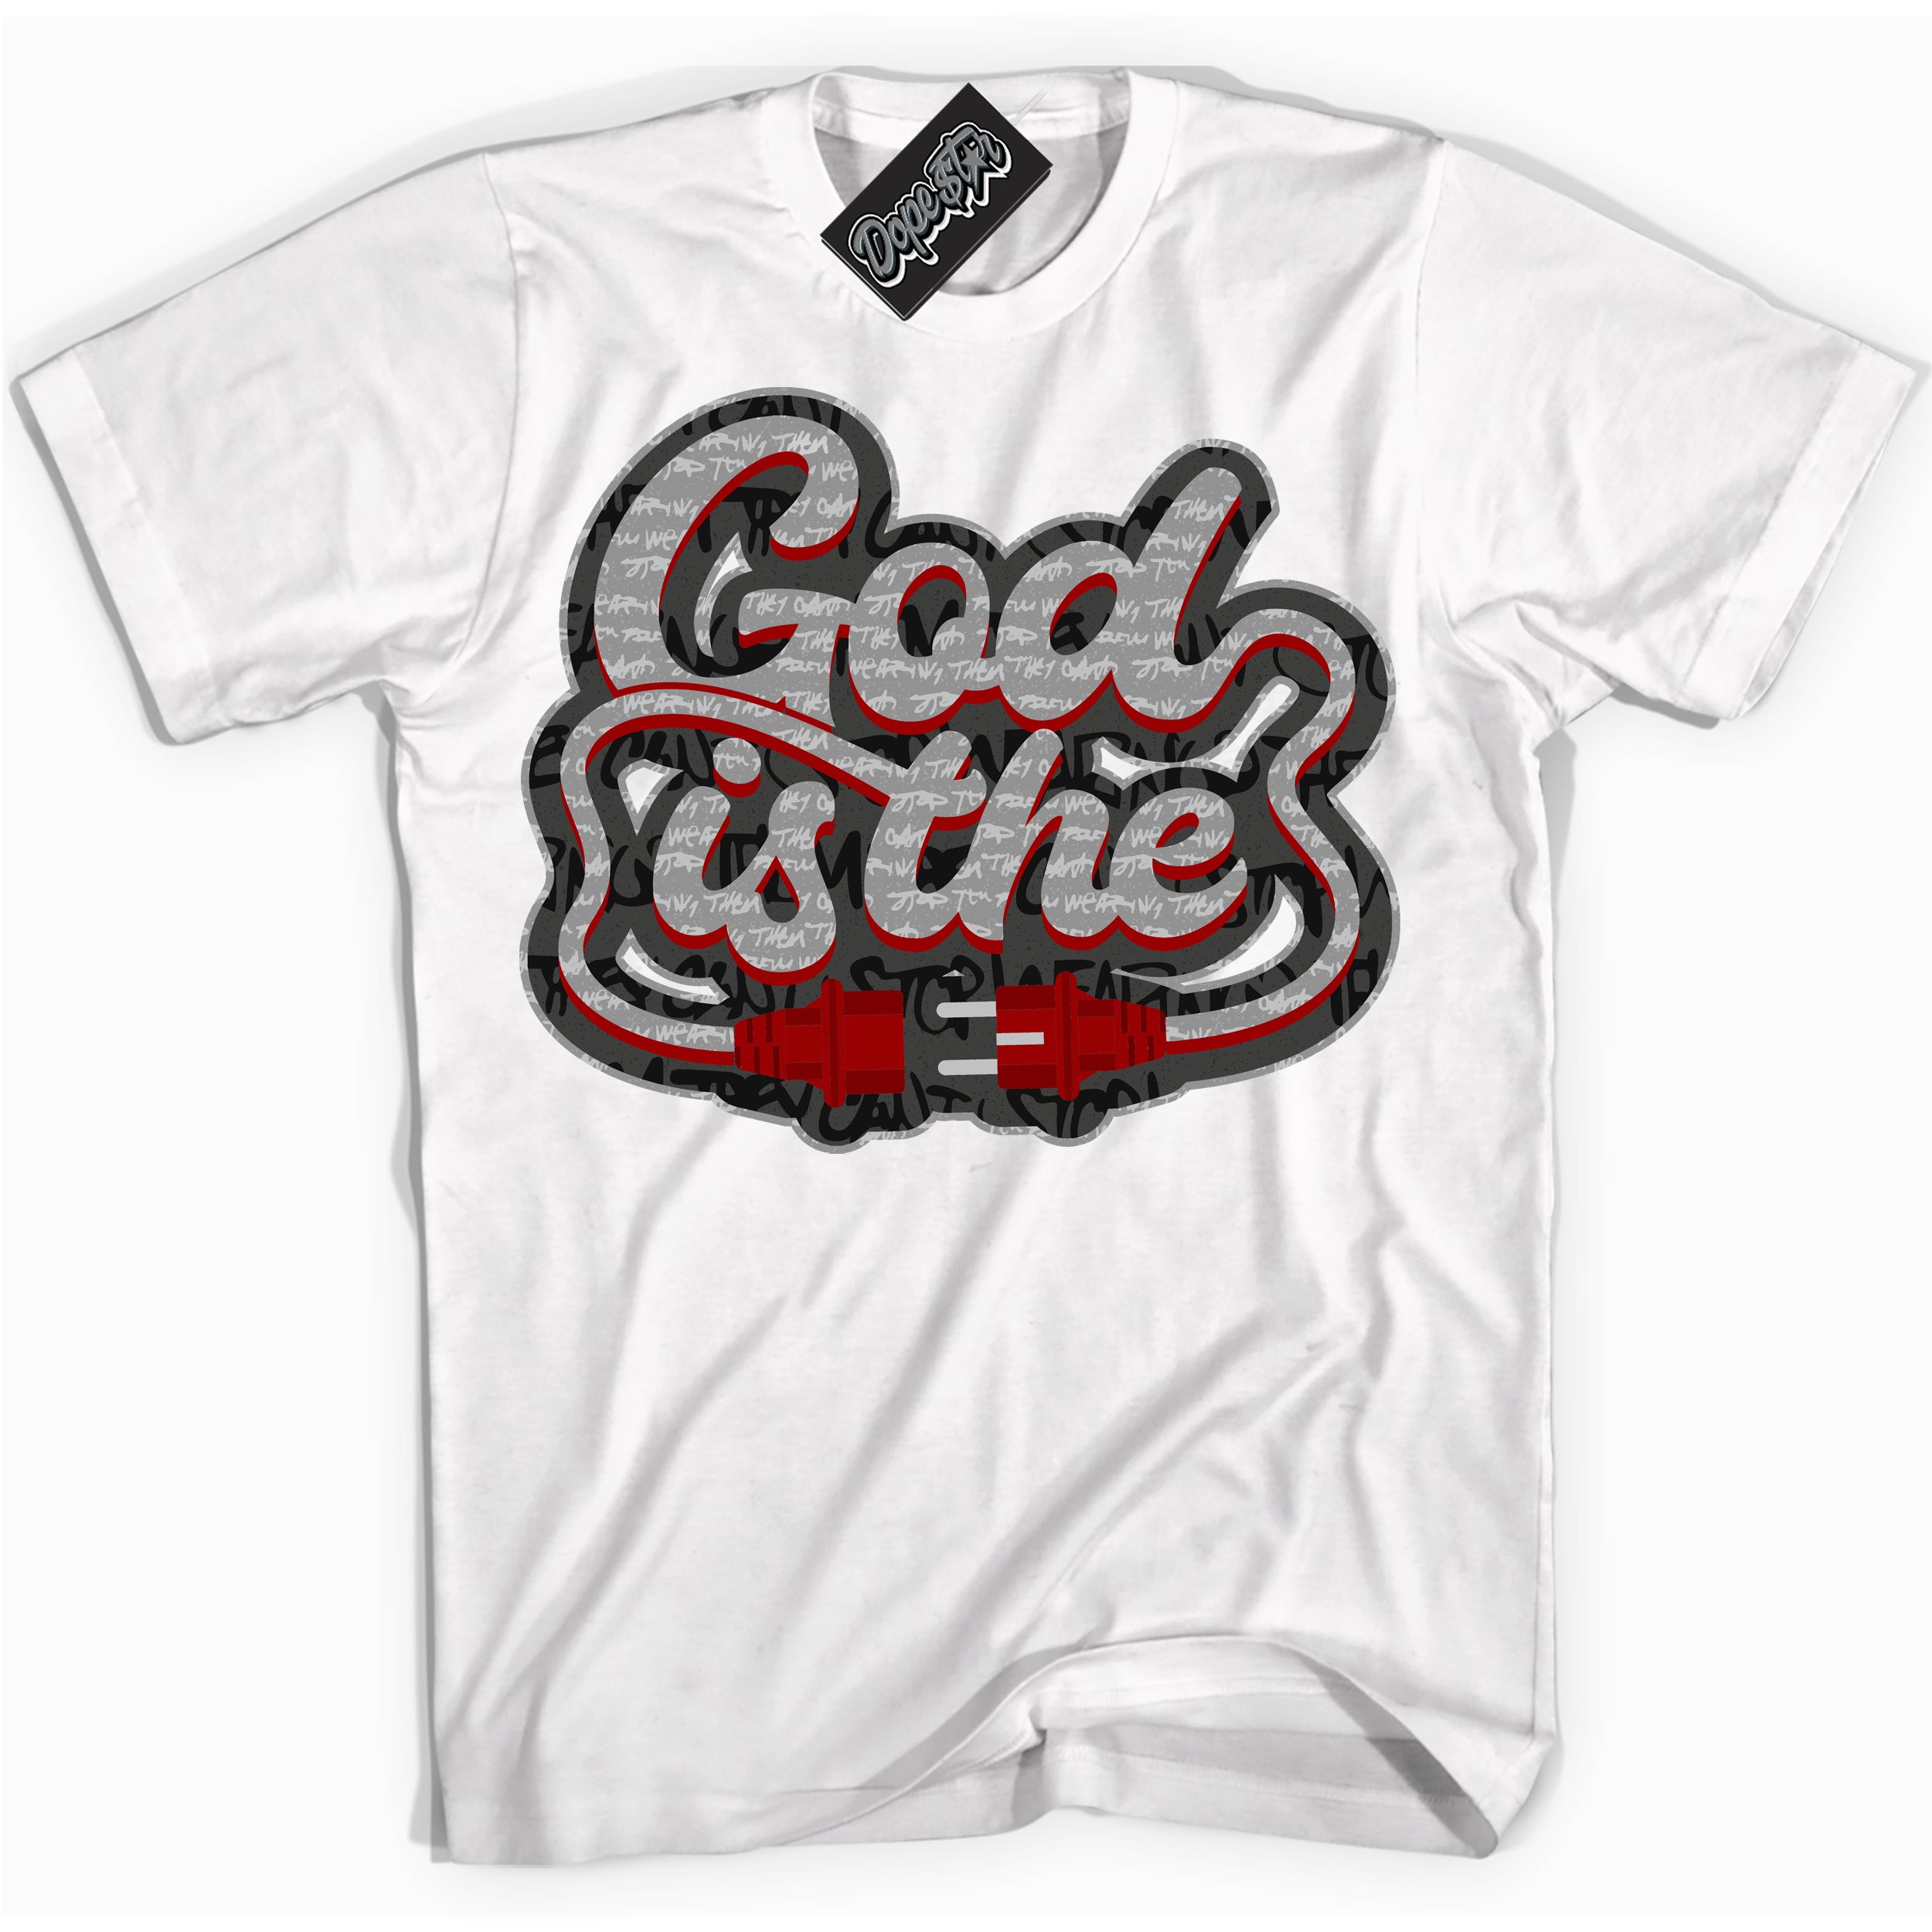 Cool White Shirt with “ God Is The ” design that perfectly matches Rebellionaire 1s Sneakers.